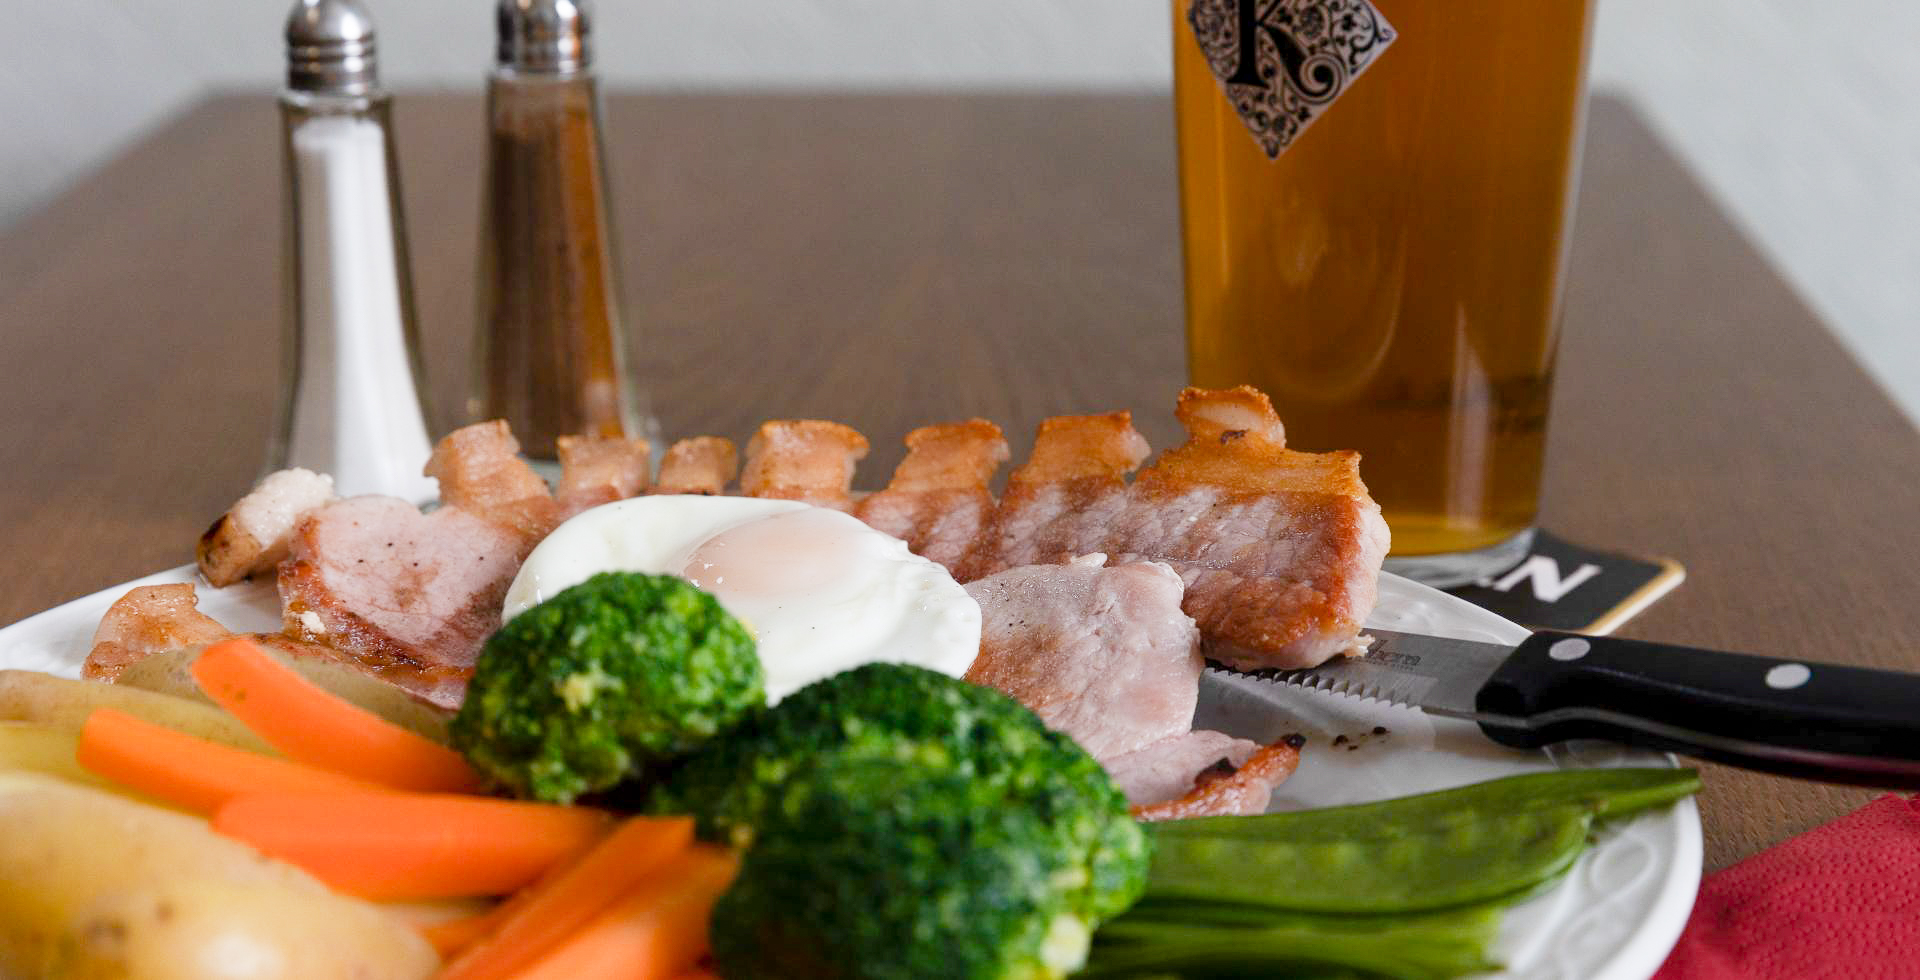 10 oz Gammon steak served with chips or potatoes, salad or vegetables, egg or pineapple